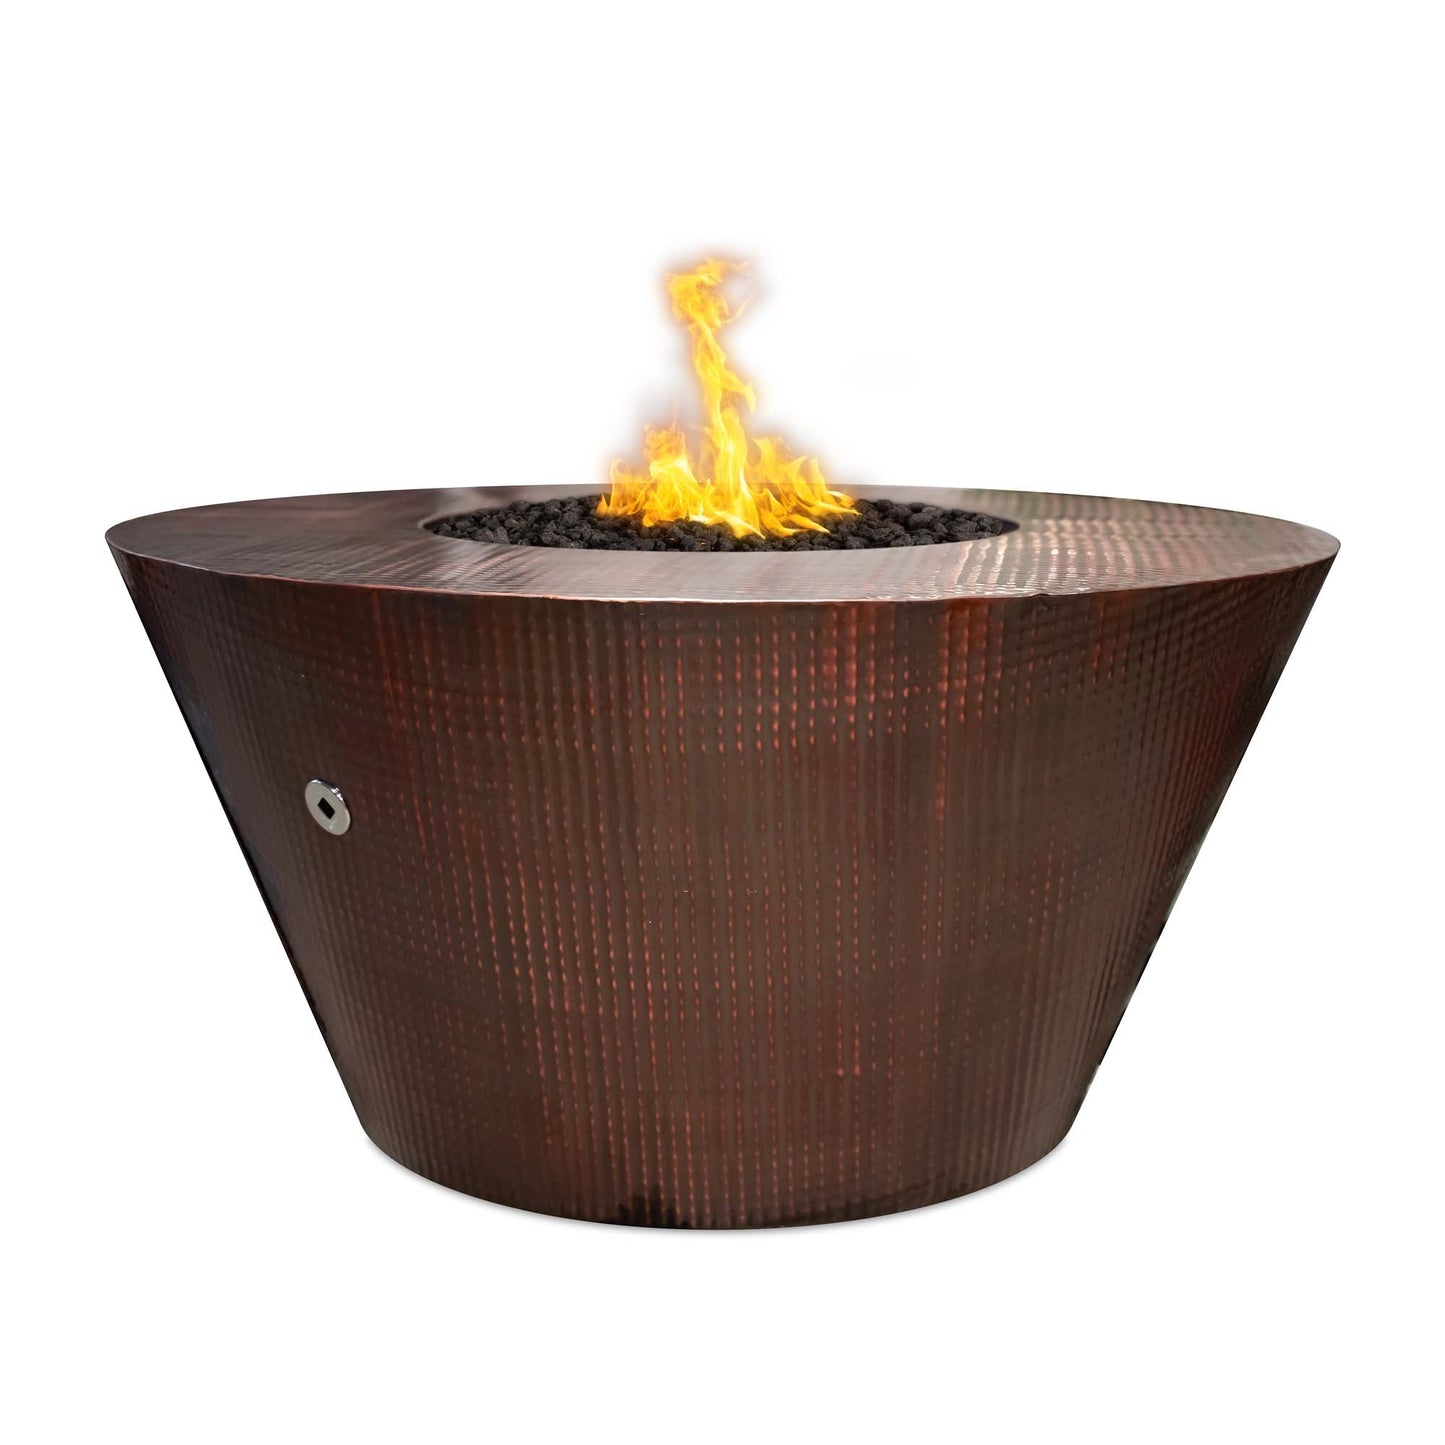 The Outdoor Plus Round Martillo 48" Pewter Powder Coated Metal Liquid Propane Fire Pit with Match Lit Ignition